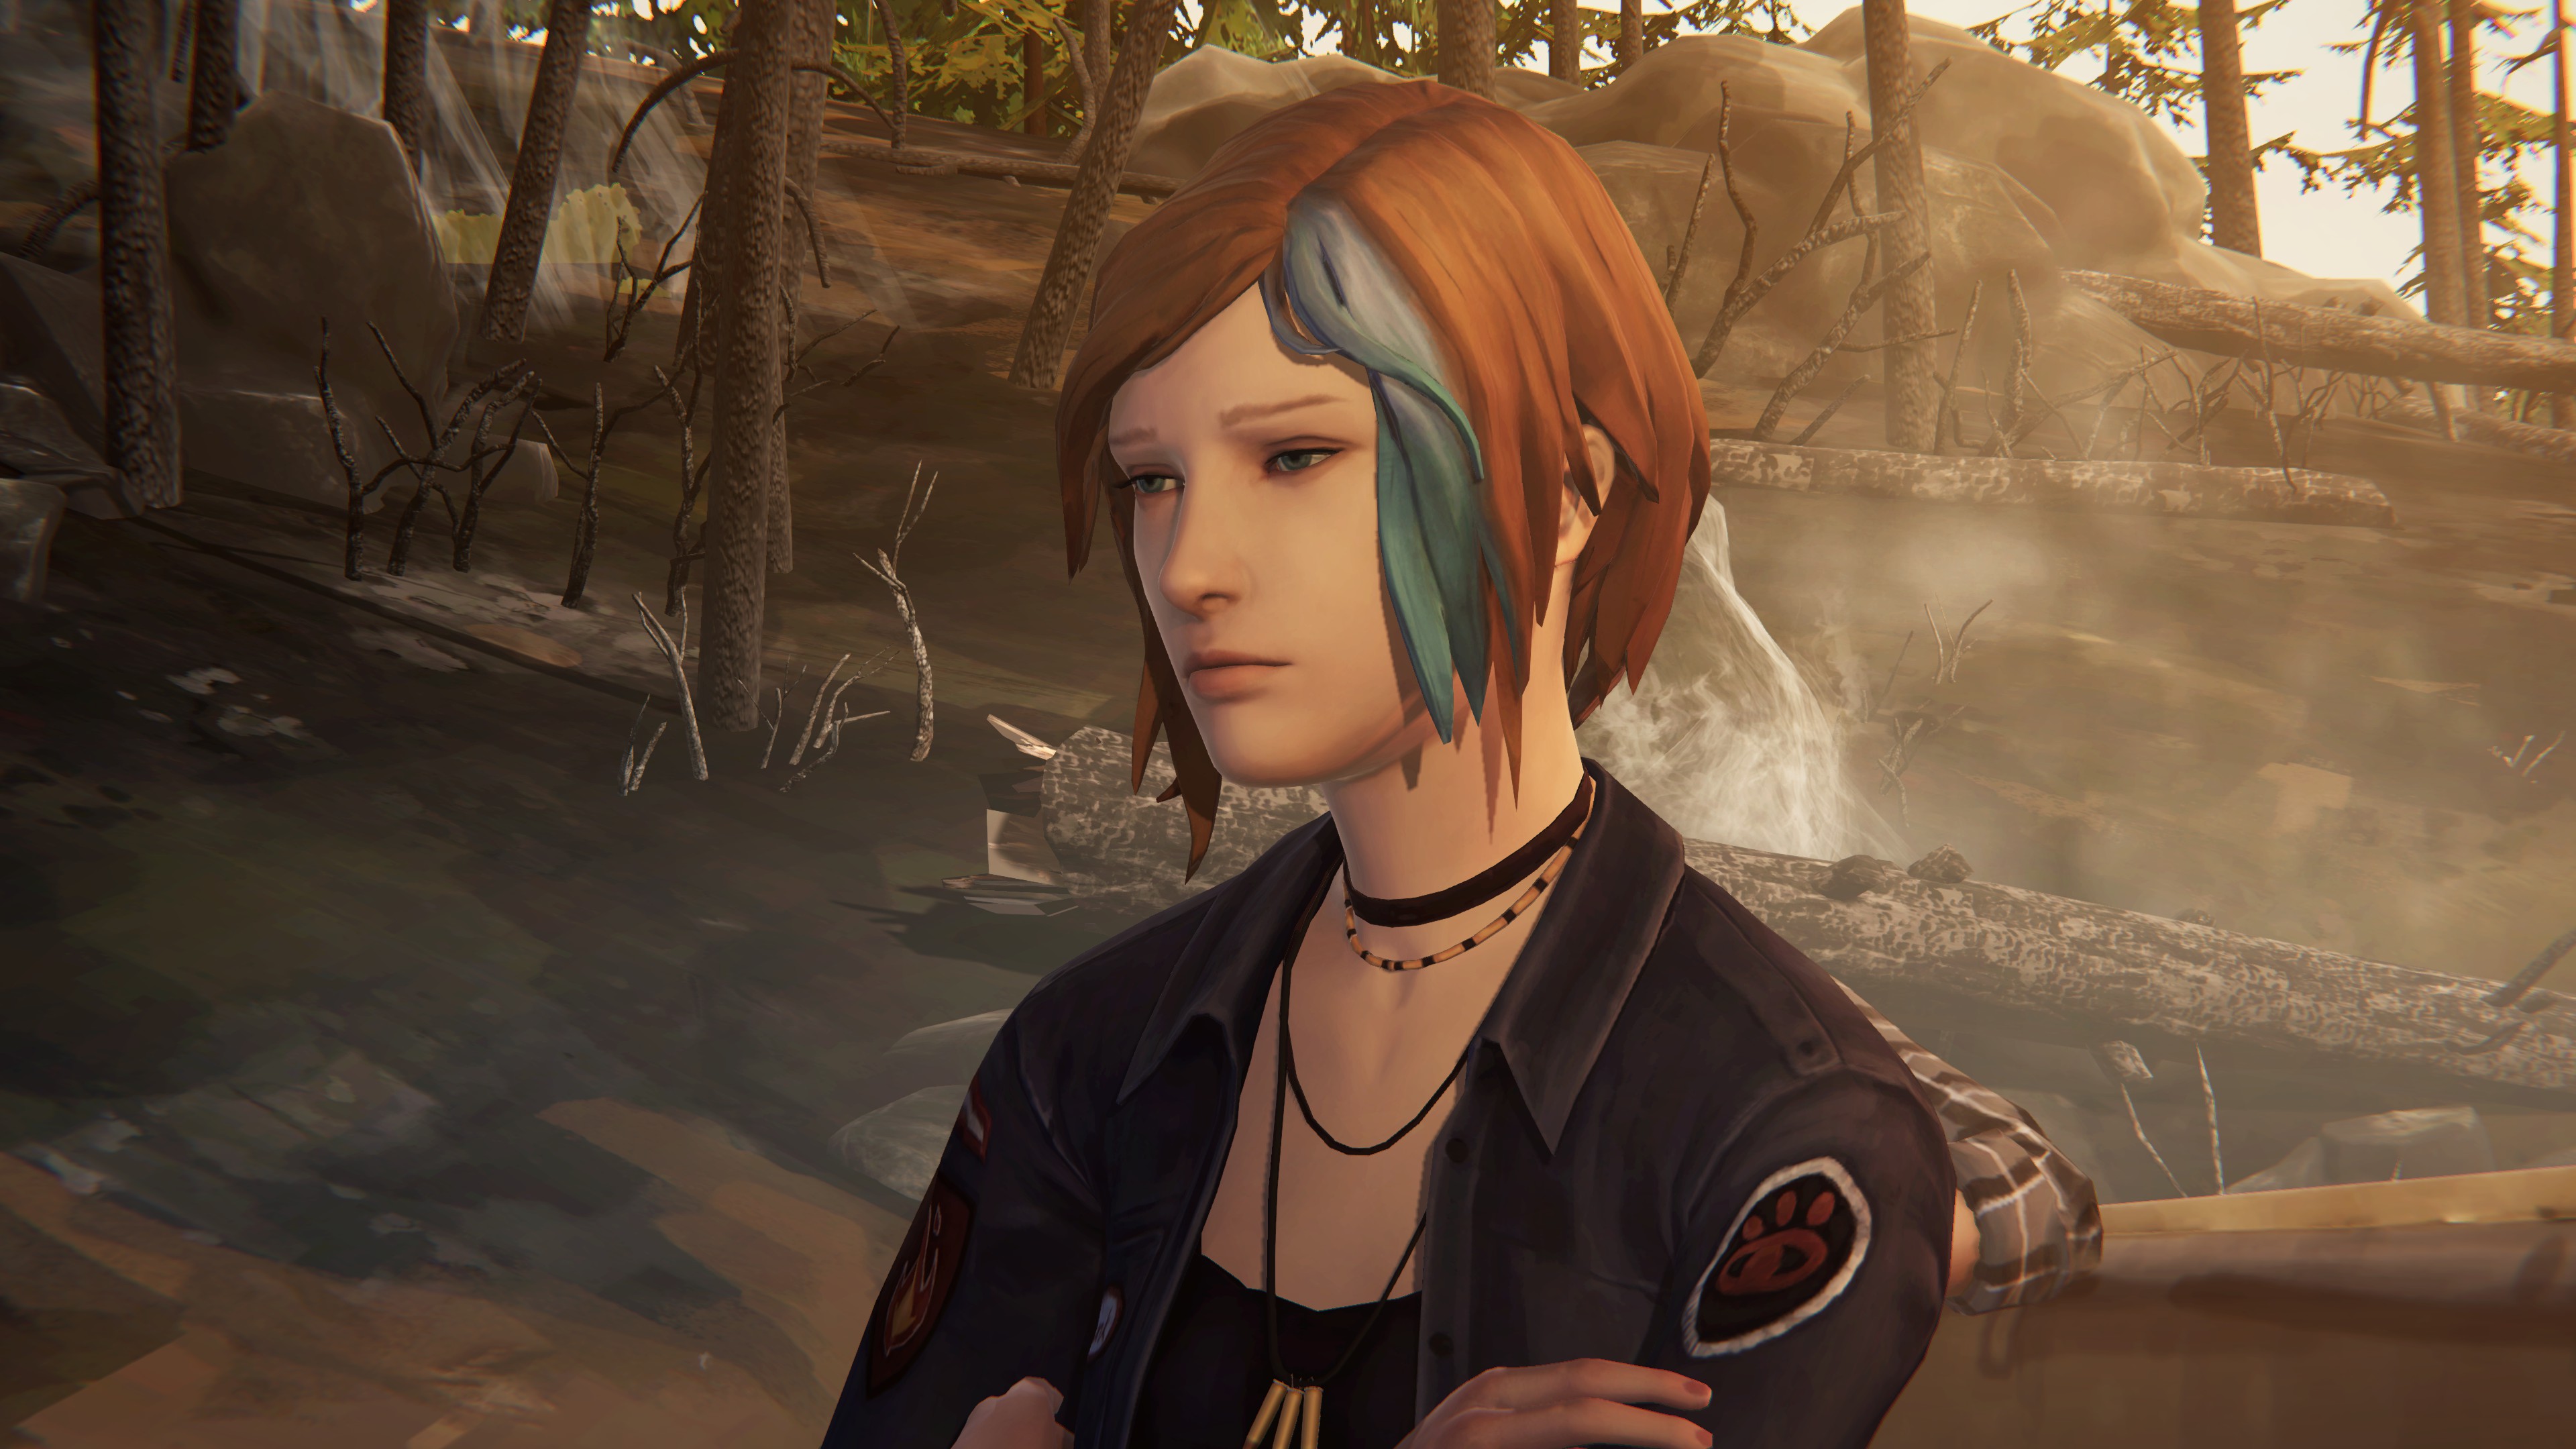 She games with her friend. Life is Strange: before the Storm. Рейчел Эмбер лайф. Роуз Эмбер Life is Strange.